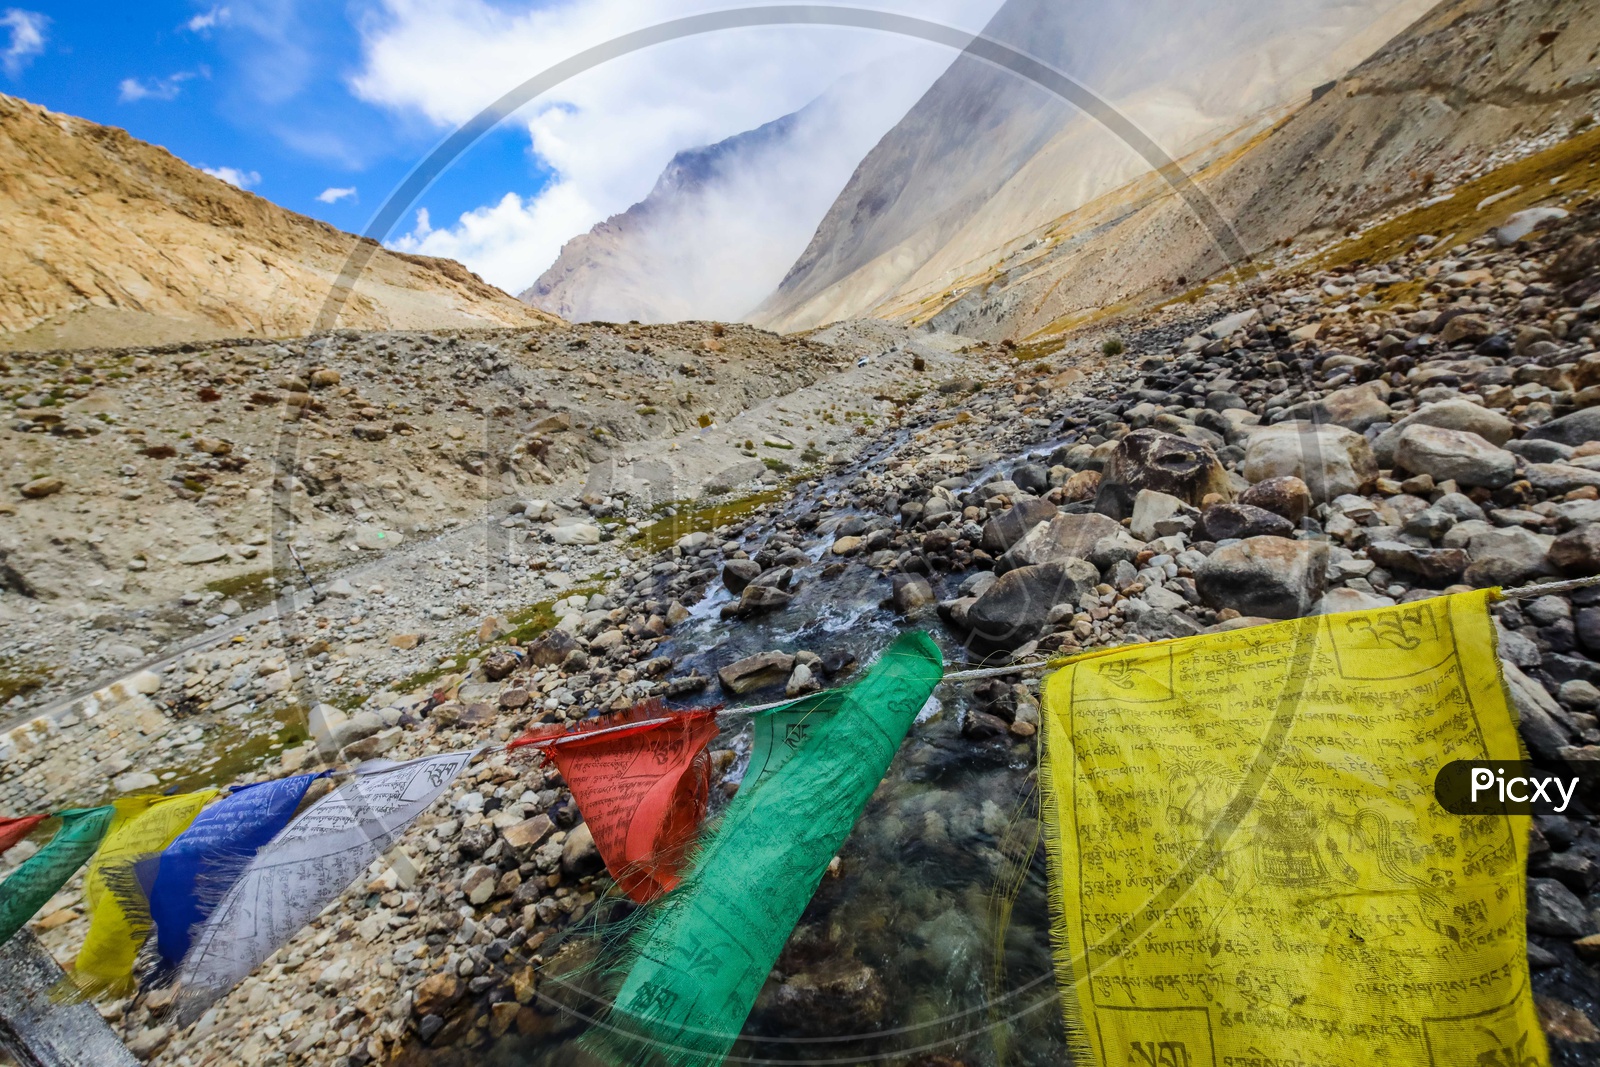 Buddhist Prayer Flags alongside the mountains and water flowing through the stream